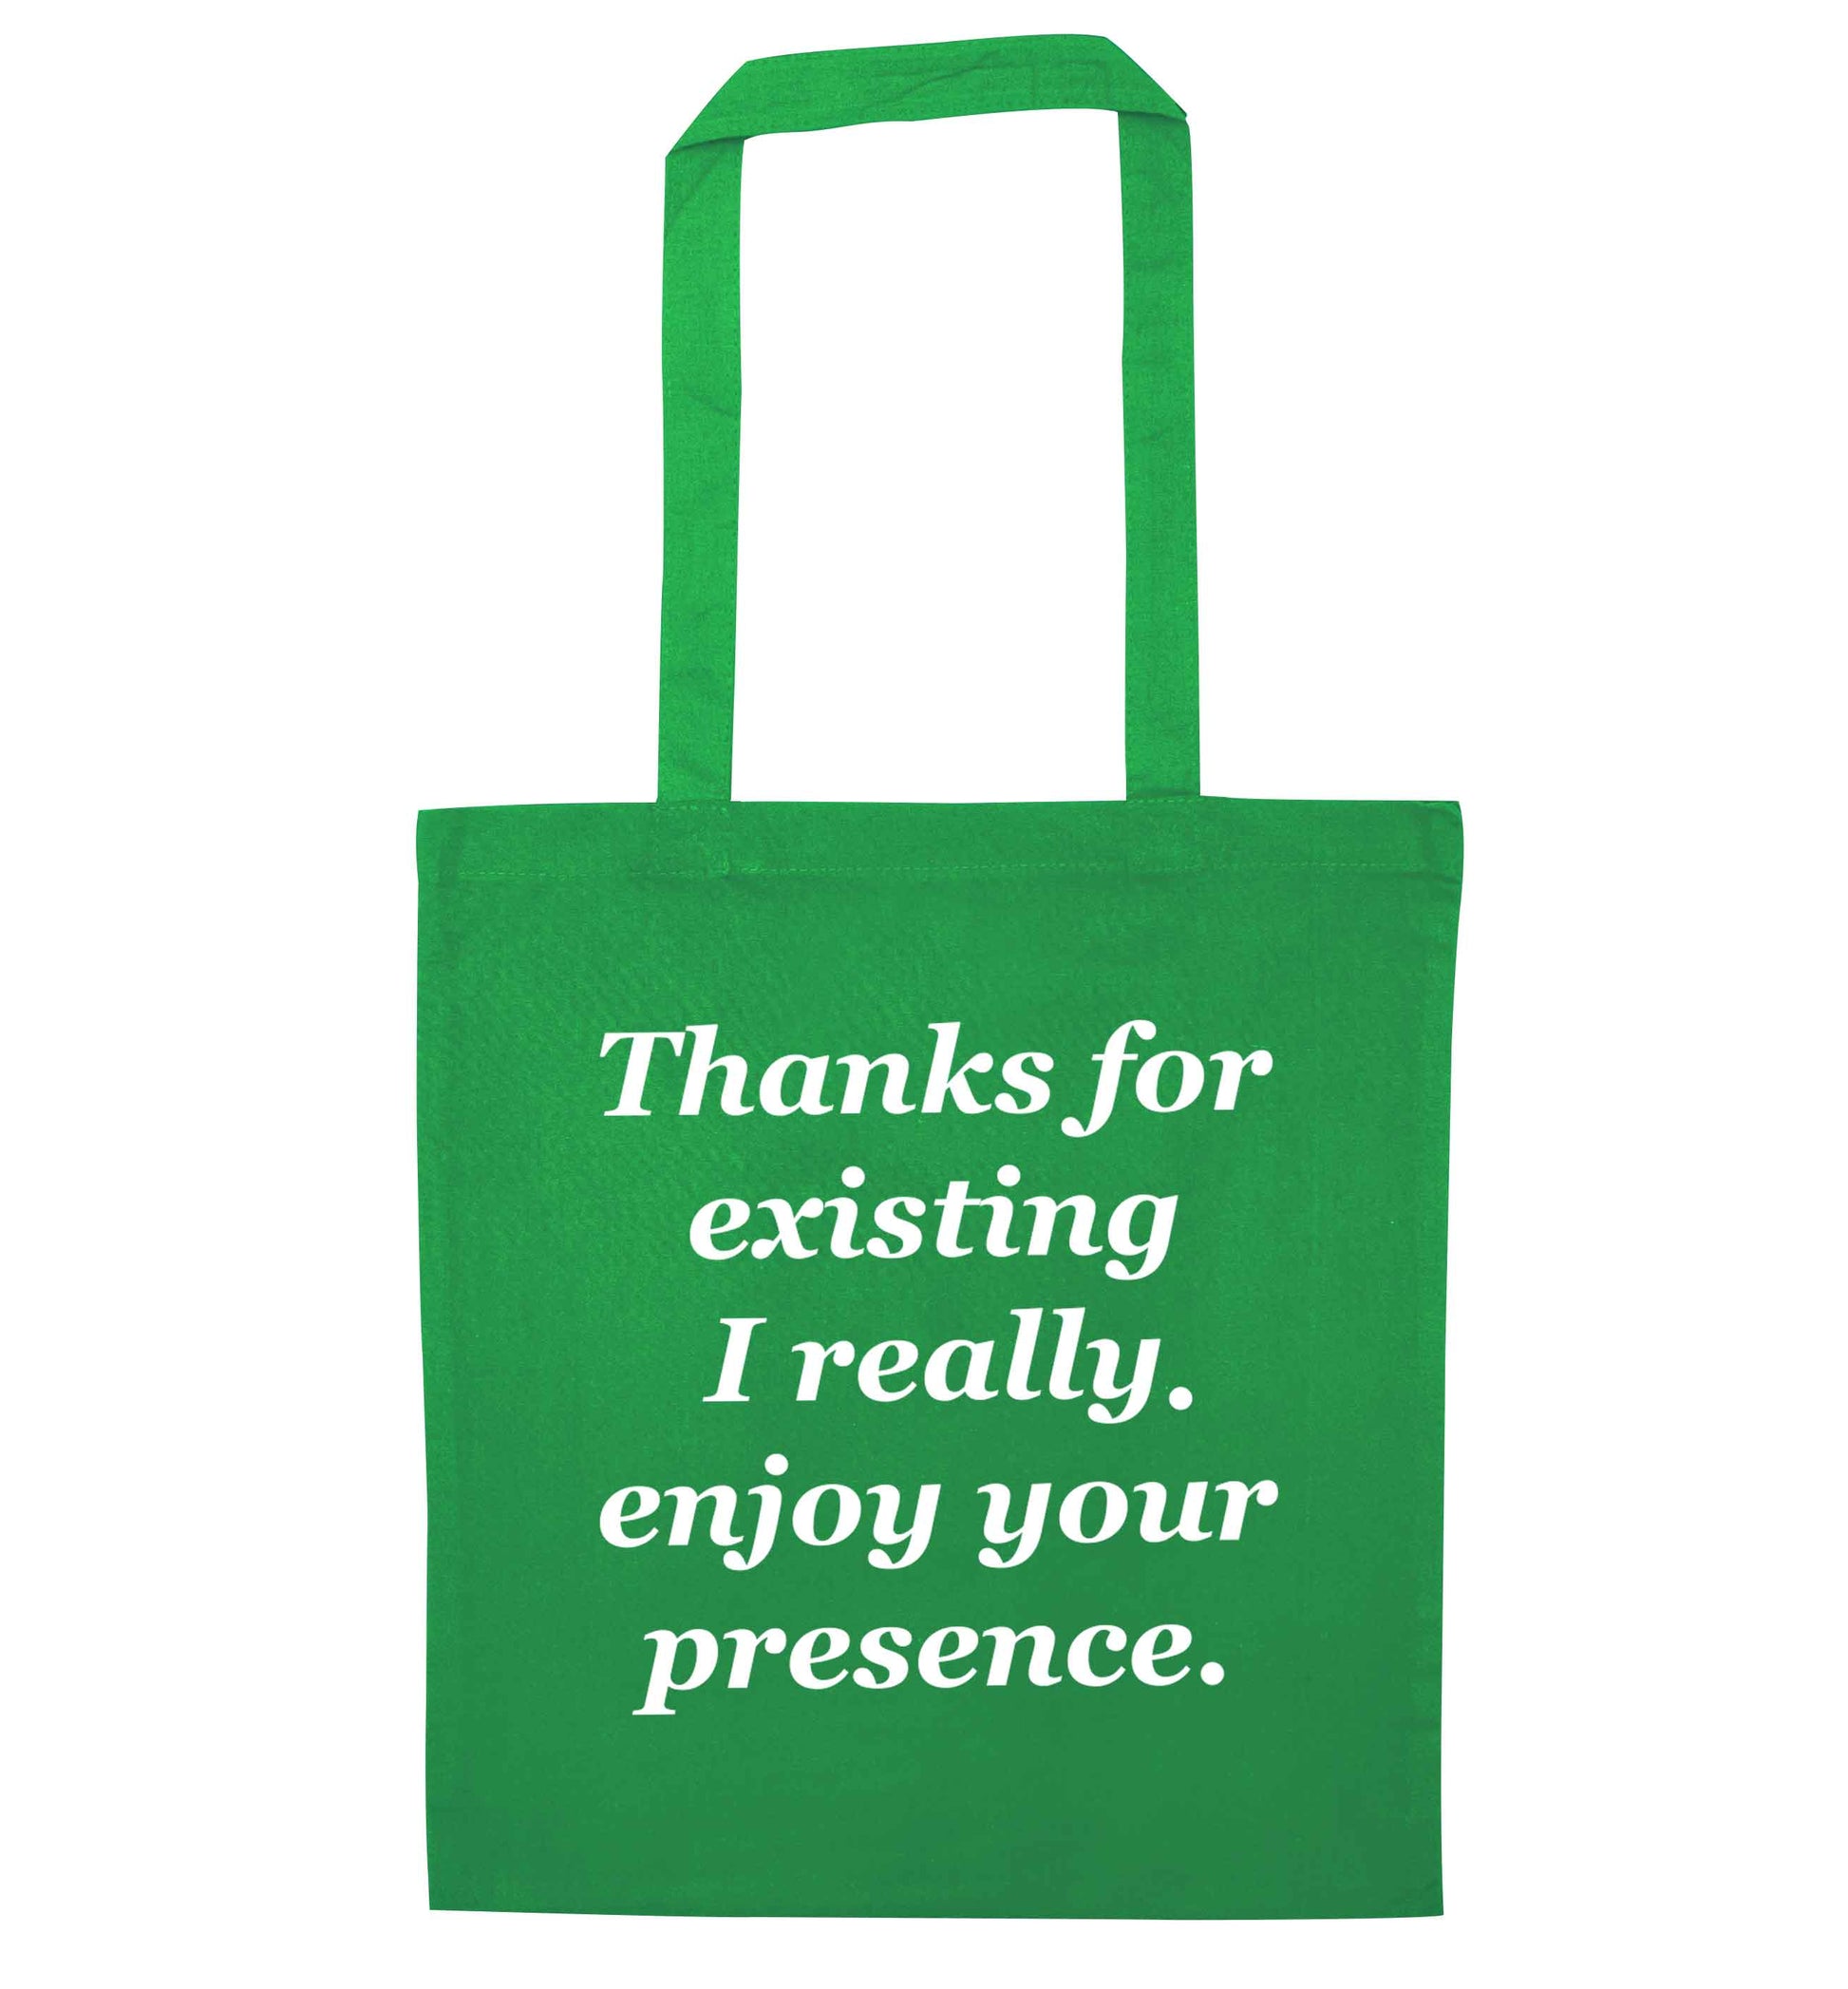 Thanks for existing I really enjoy your presence green tote bag